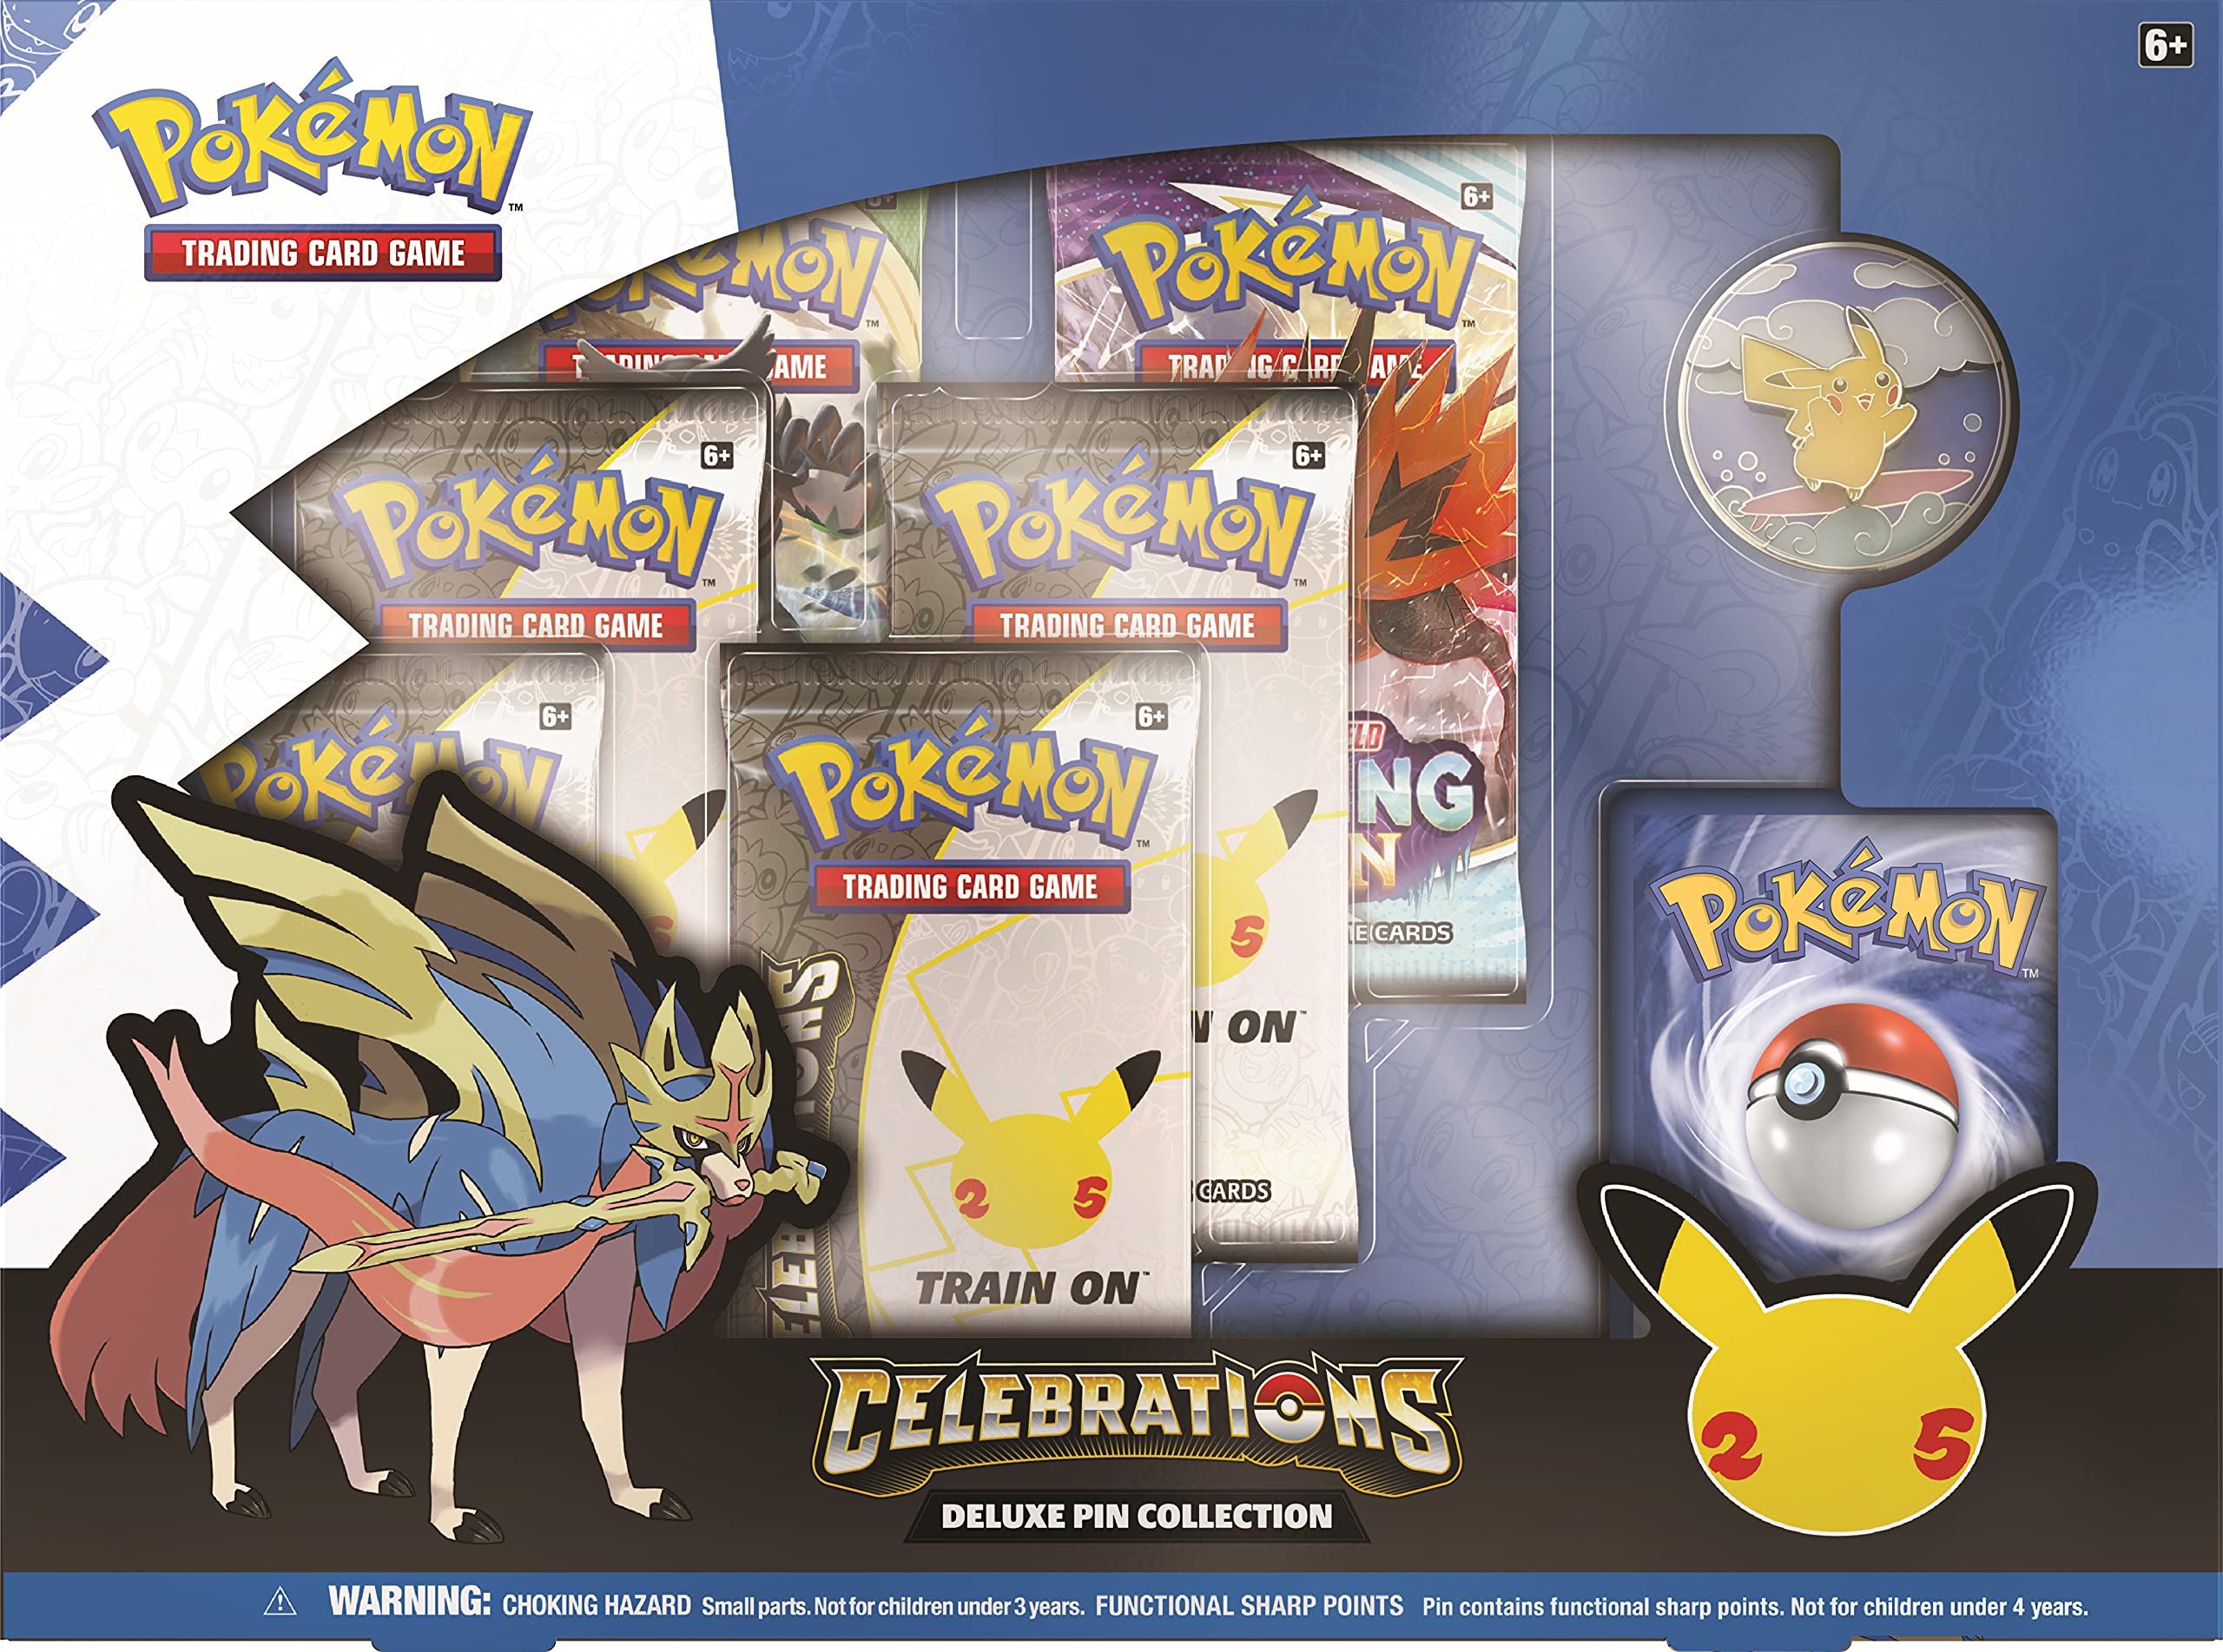 Pokemon TCG: 25th Anniversary Deluxe Pin Collection